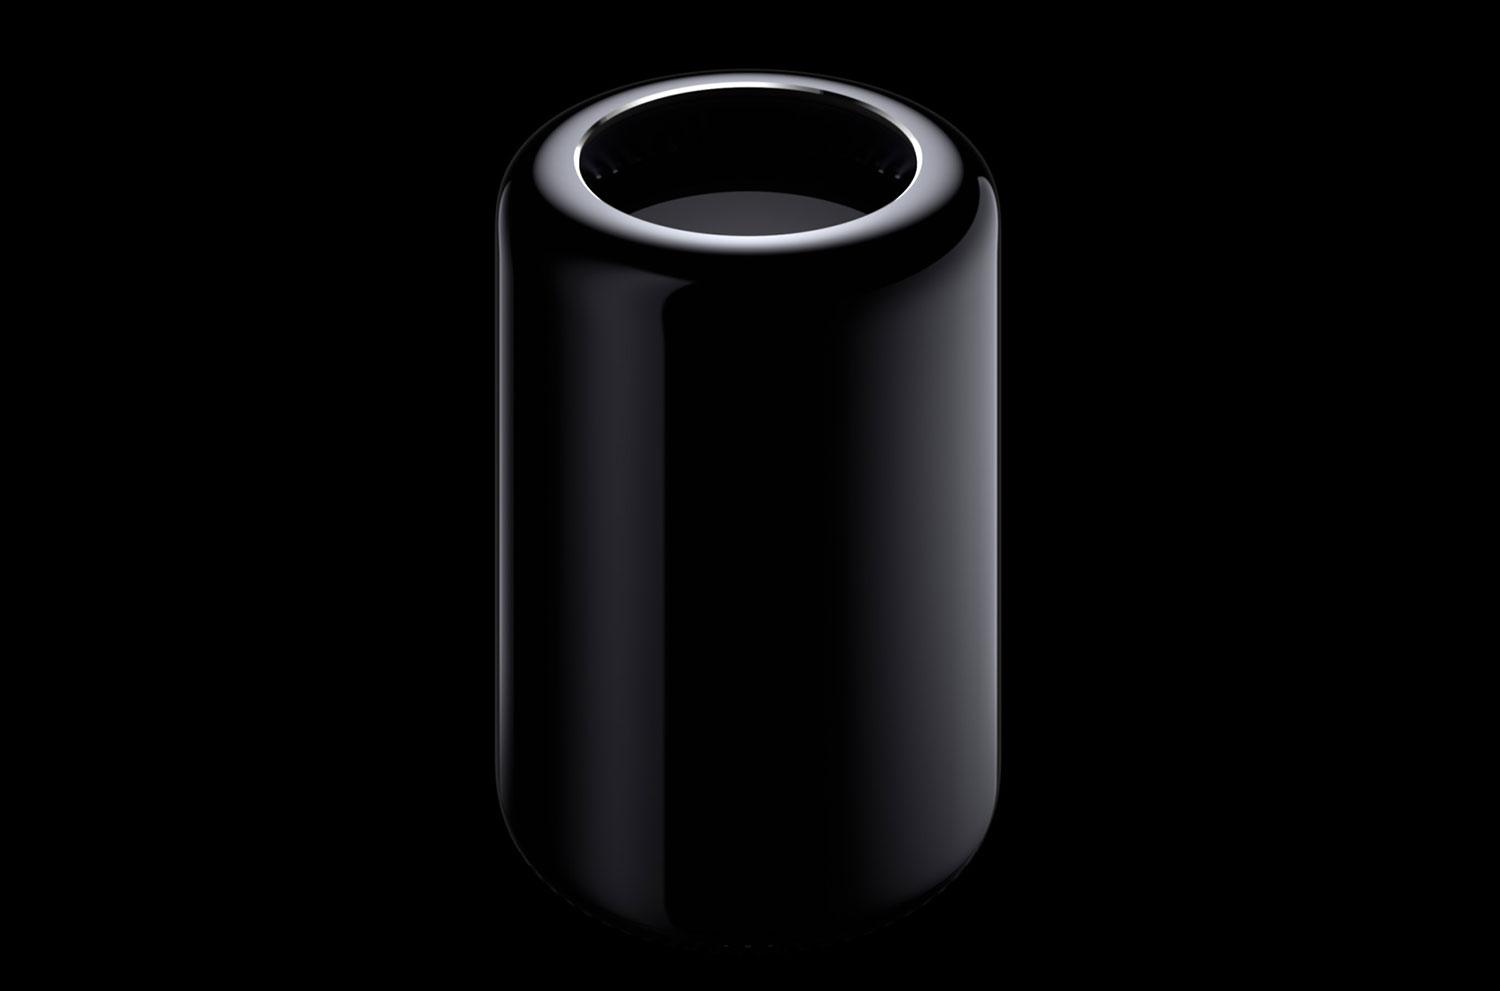 The Apple Mac Pro is getting an upgrade, finally